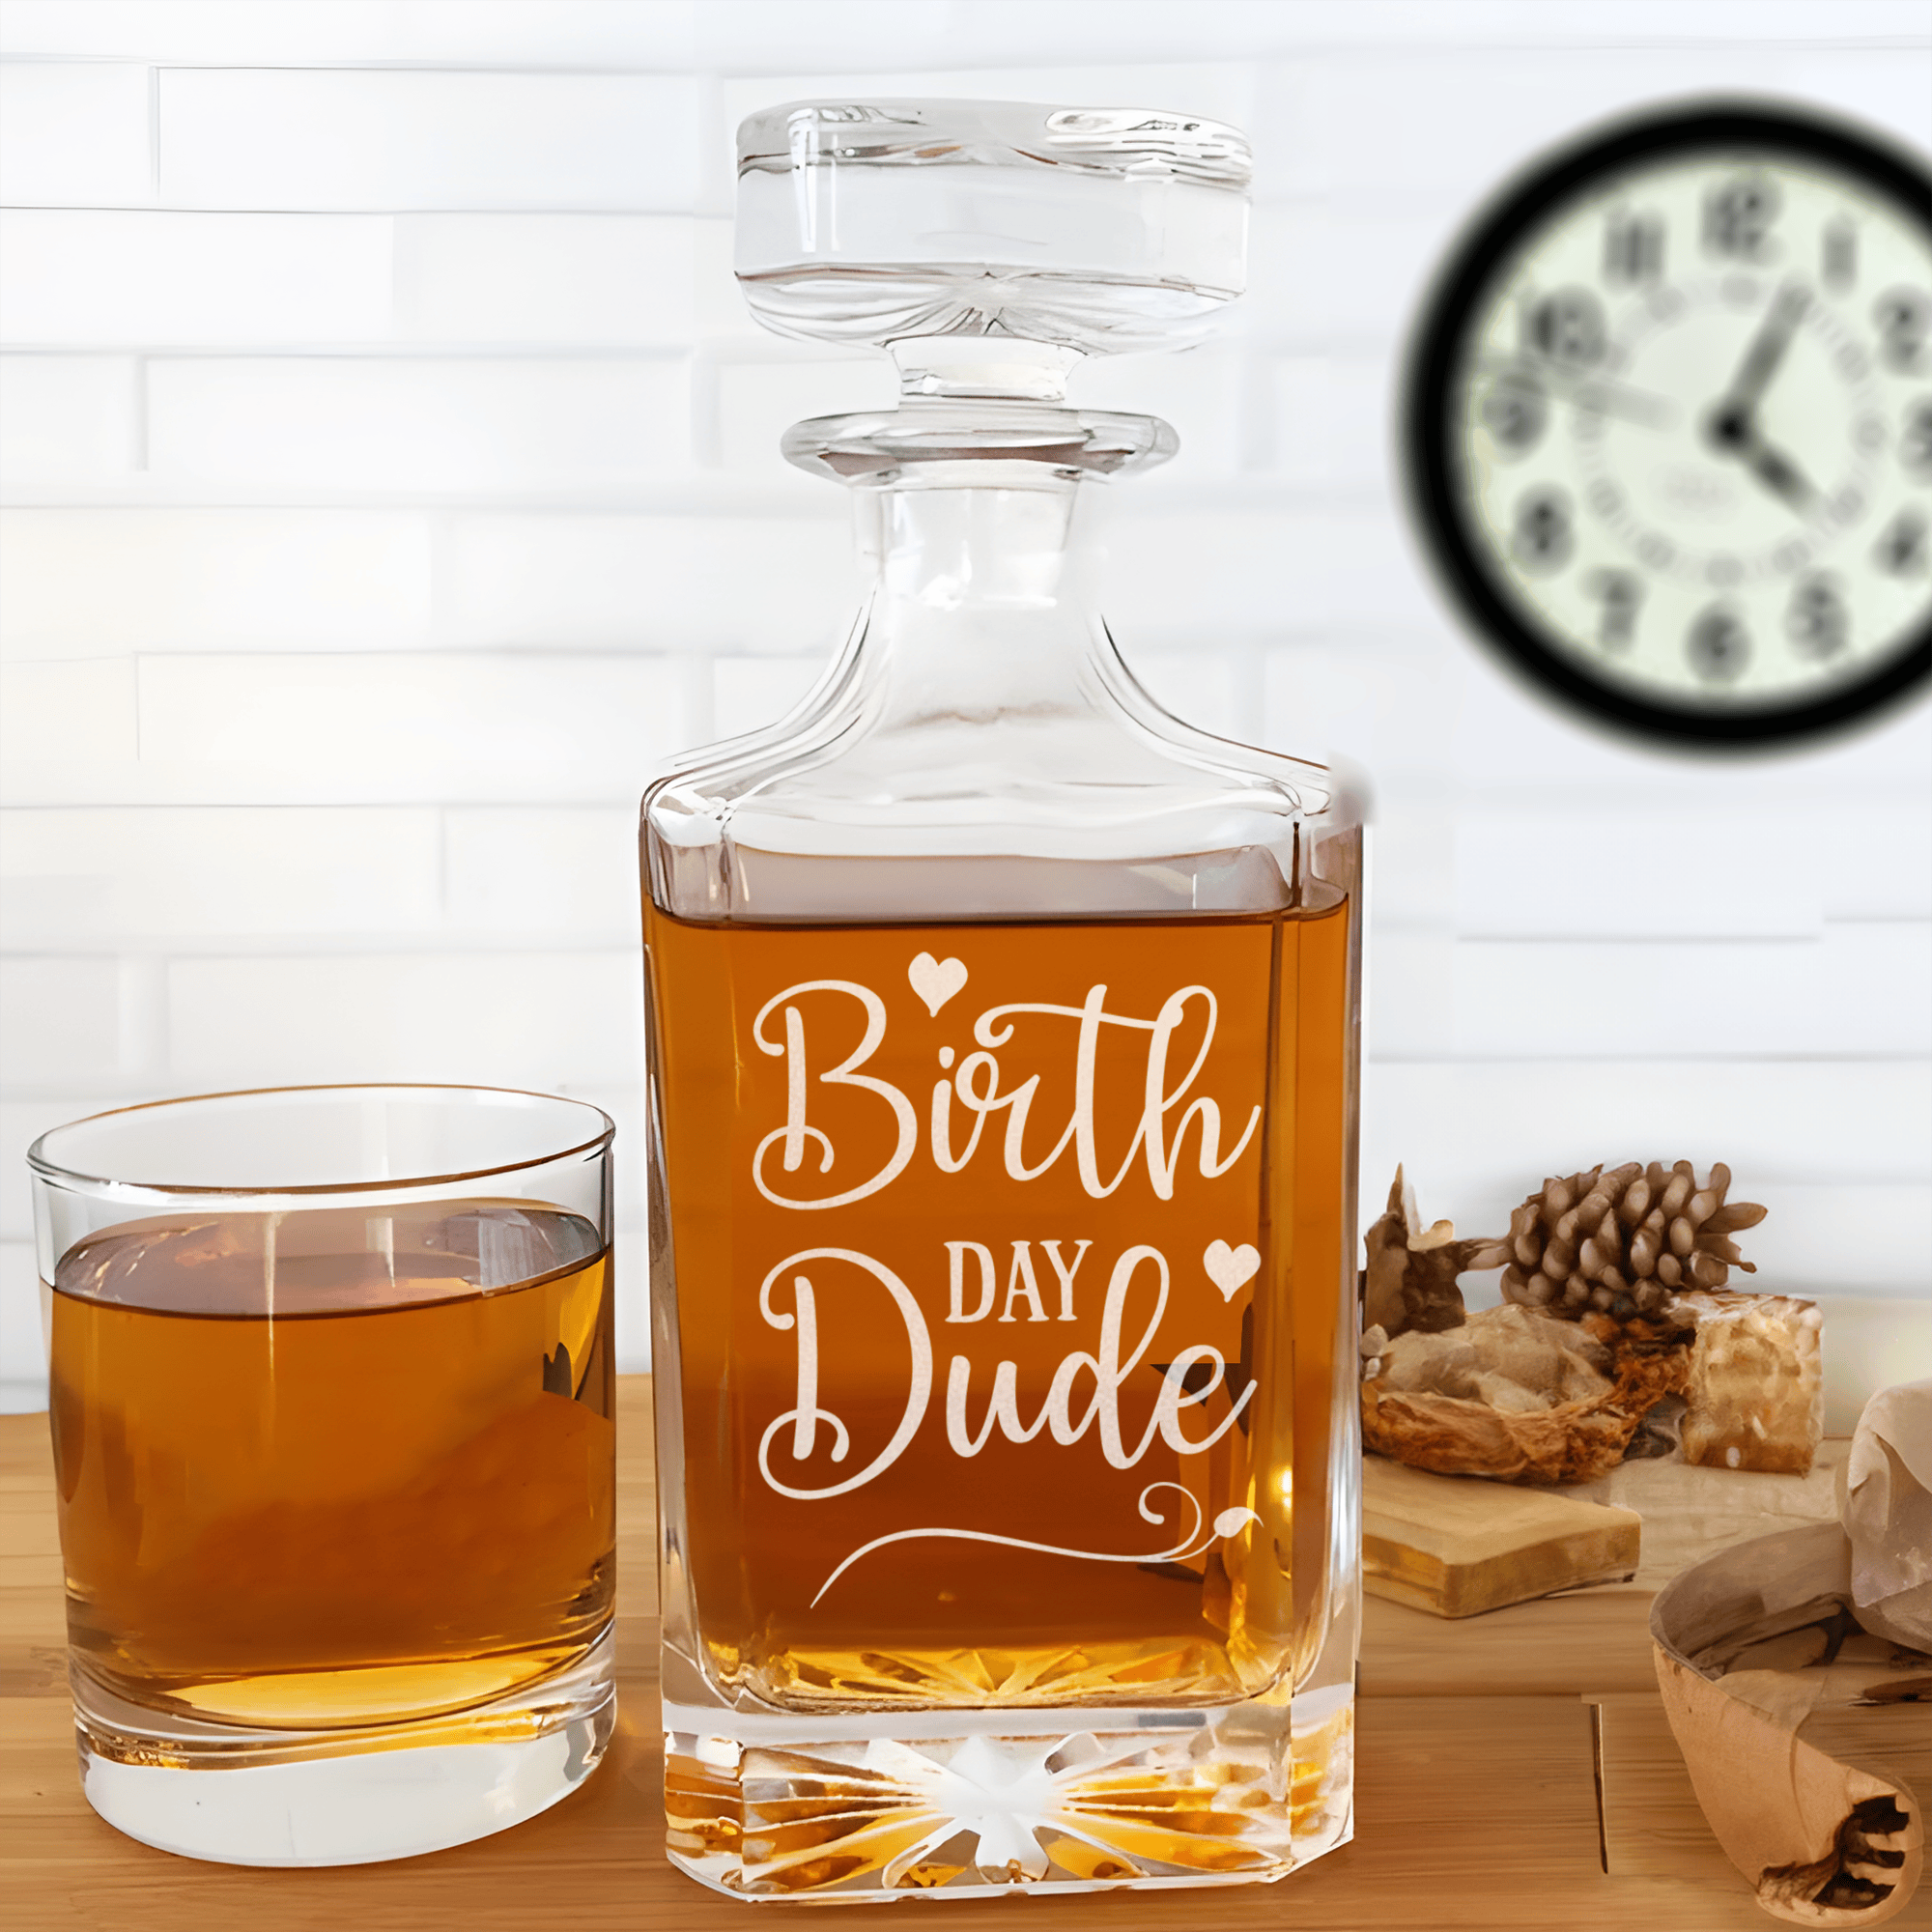 Birthday Whiskey Decanter With Birth Day Dude Design